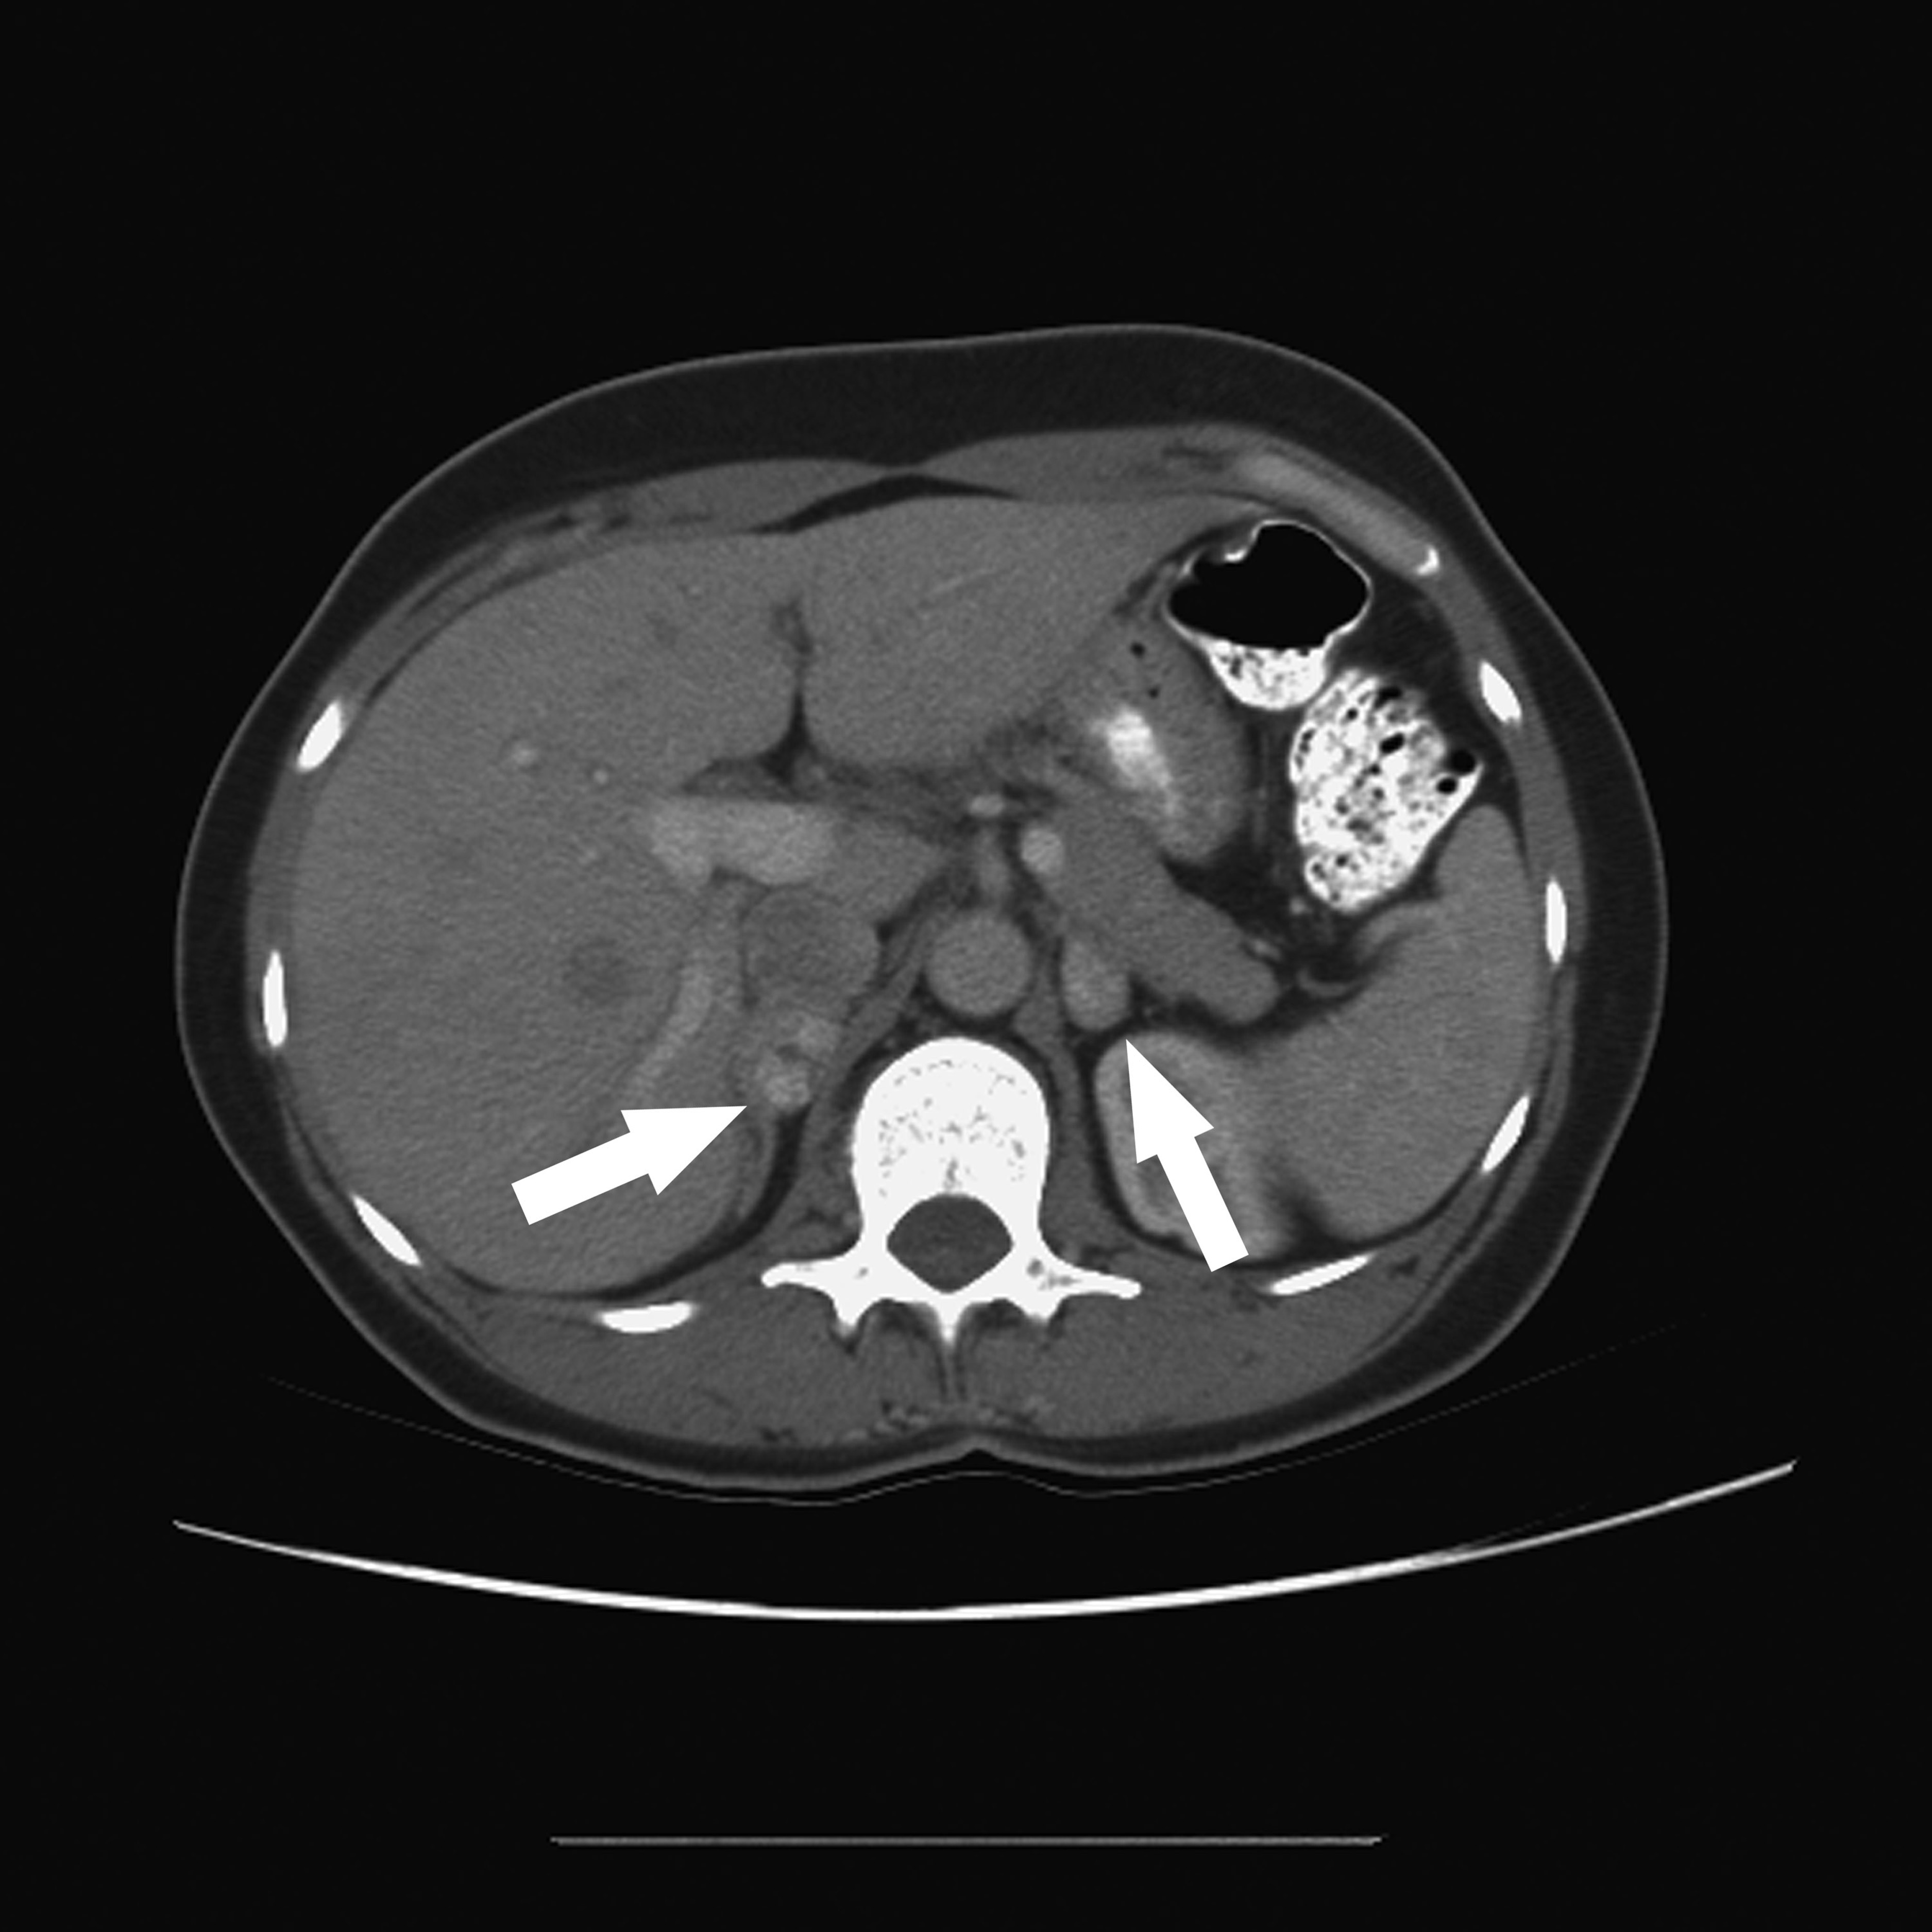 Computed tomography (CT) scan with contrast media of bilateral pheochromocytomas (arrows). This patient has von Hippel-Lindau syndrome. A pheochromocytoma or phaeochromocytoma (PCC) is a neuroendocrine tumor of the medulla of the adrenal glands (originating in the chromaffin cells), or extra-adrenal chromaffin tissue that failed to involute after birth and secretes high amounts of catecholamines, mostly epinephrine, plus norepinephrine to a lesser extent. Von Hippel-Lindau disease (VHL) is a disease which results from a mutation in the von Hippel-Lindau tumor suppressor gene on chromosome 3p25.3